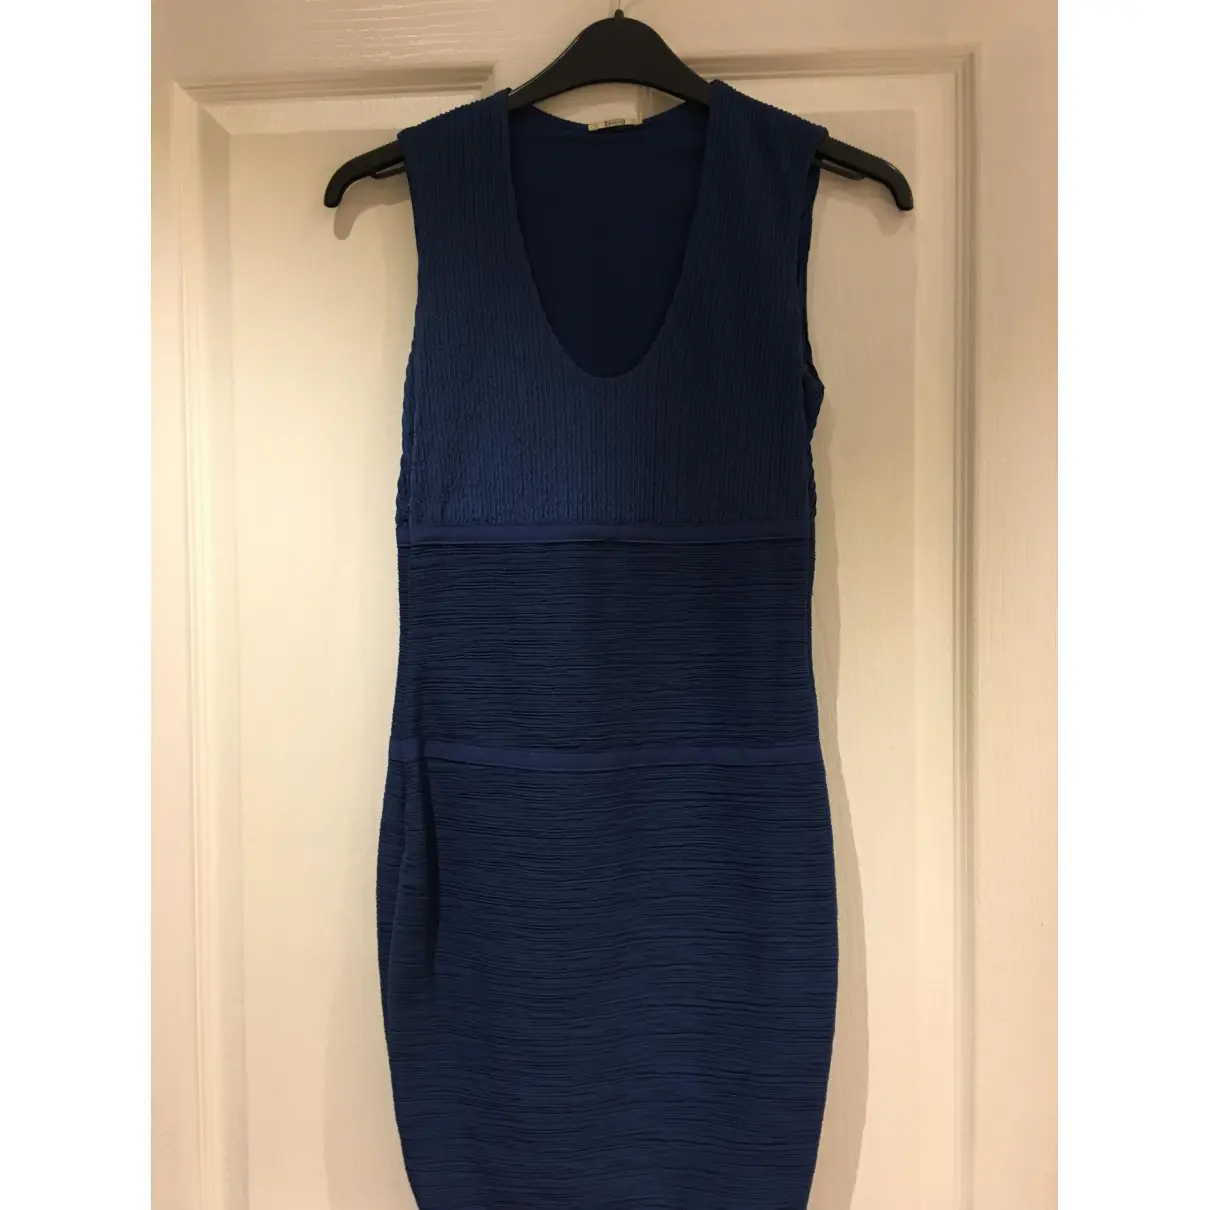 Wolford Mid-length dress for sale